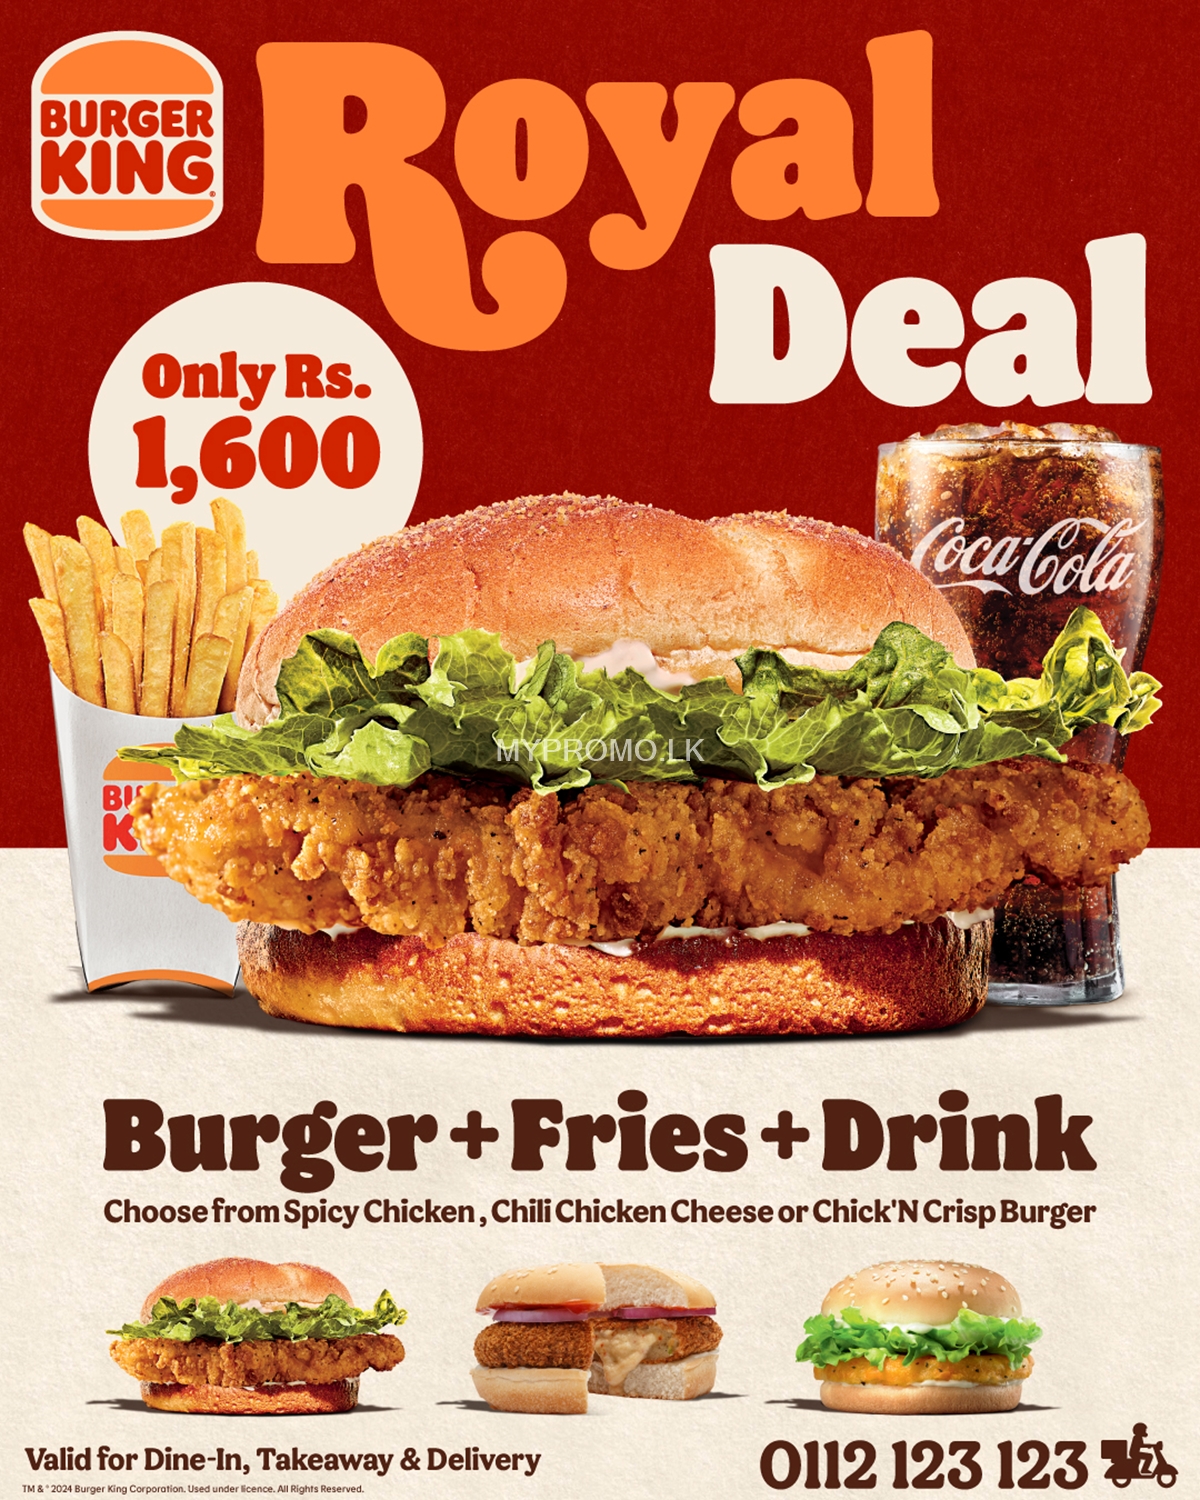 THE ROYAL DEAL from Burger King